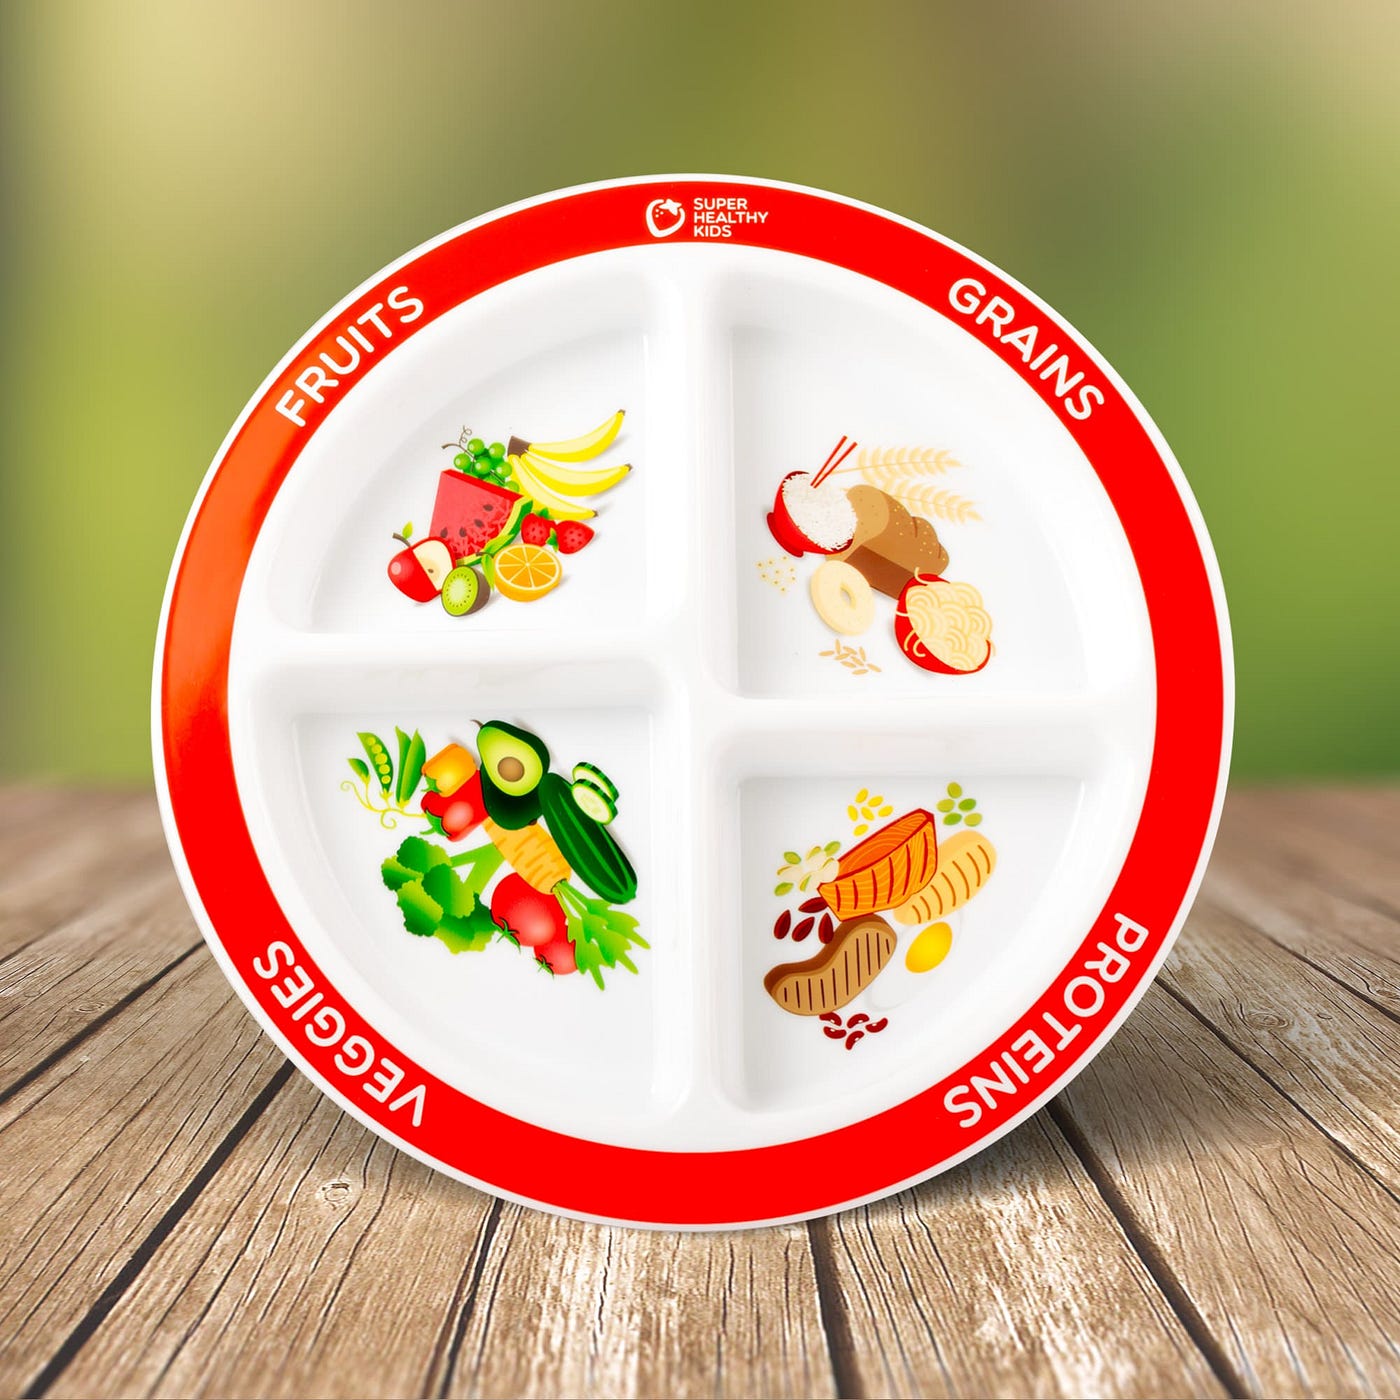 portion control plate<br>portion plate<br>portion food plate<br>food portion plates<br>adult portion plate<br>portion bowls<br>portion size plates<br>portion plates for weight loss<br>plate portion for weight <a href=